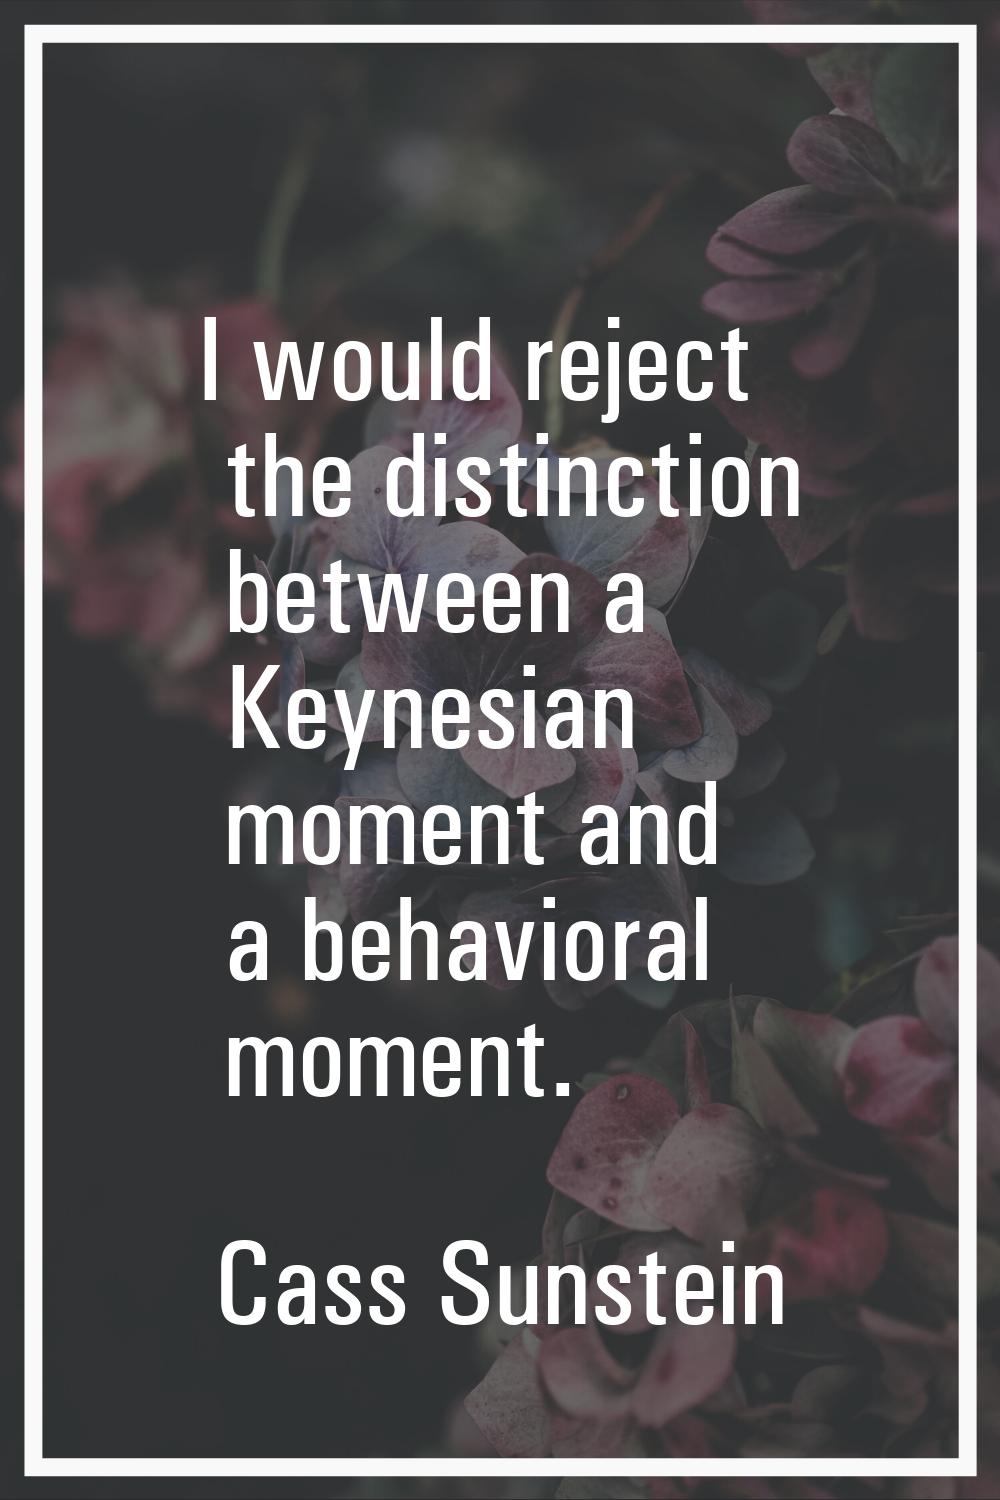 I would reject the distinction between a Keynesian moment and a behavioral moment.